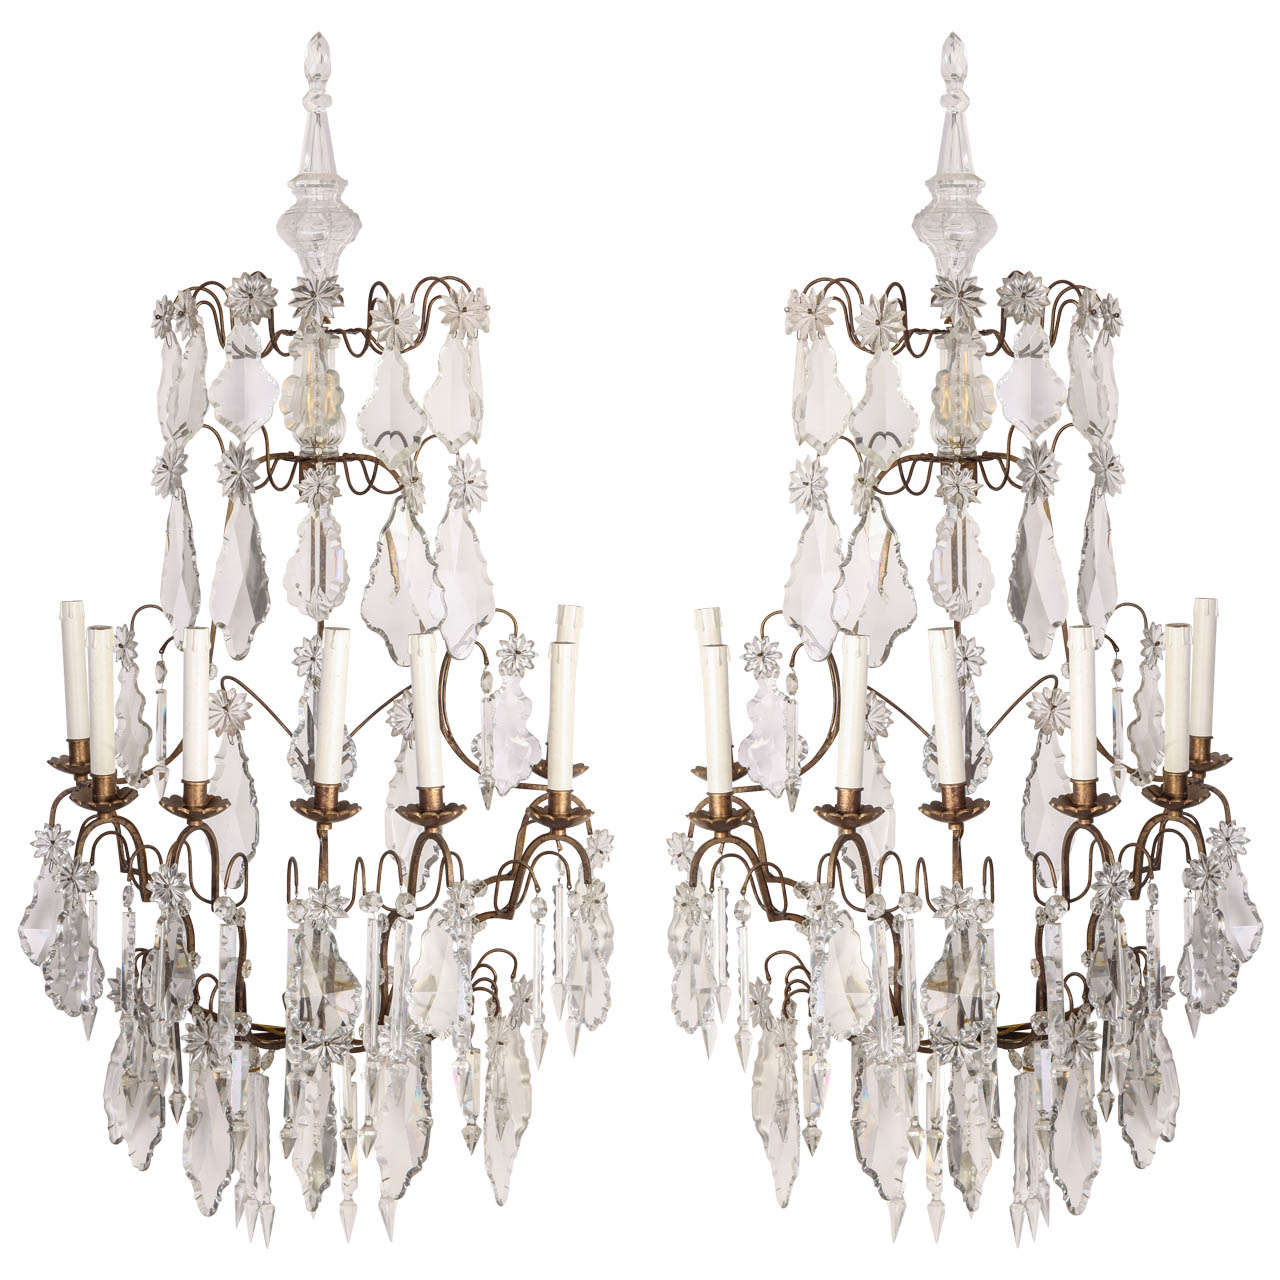  Pair of 19th century Continental Seven Branch Cut-Glass Wall Lights